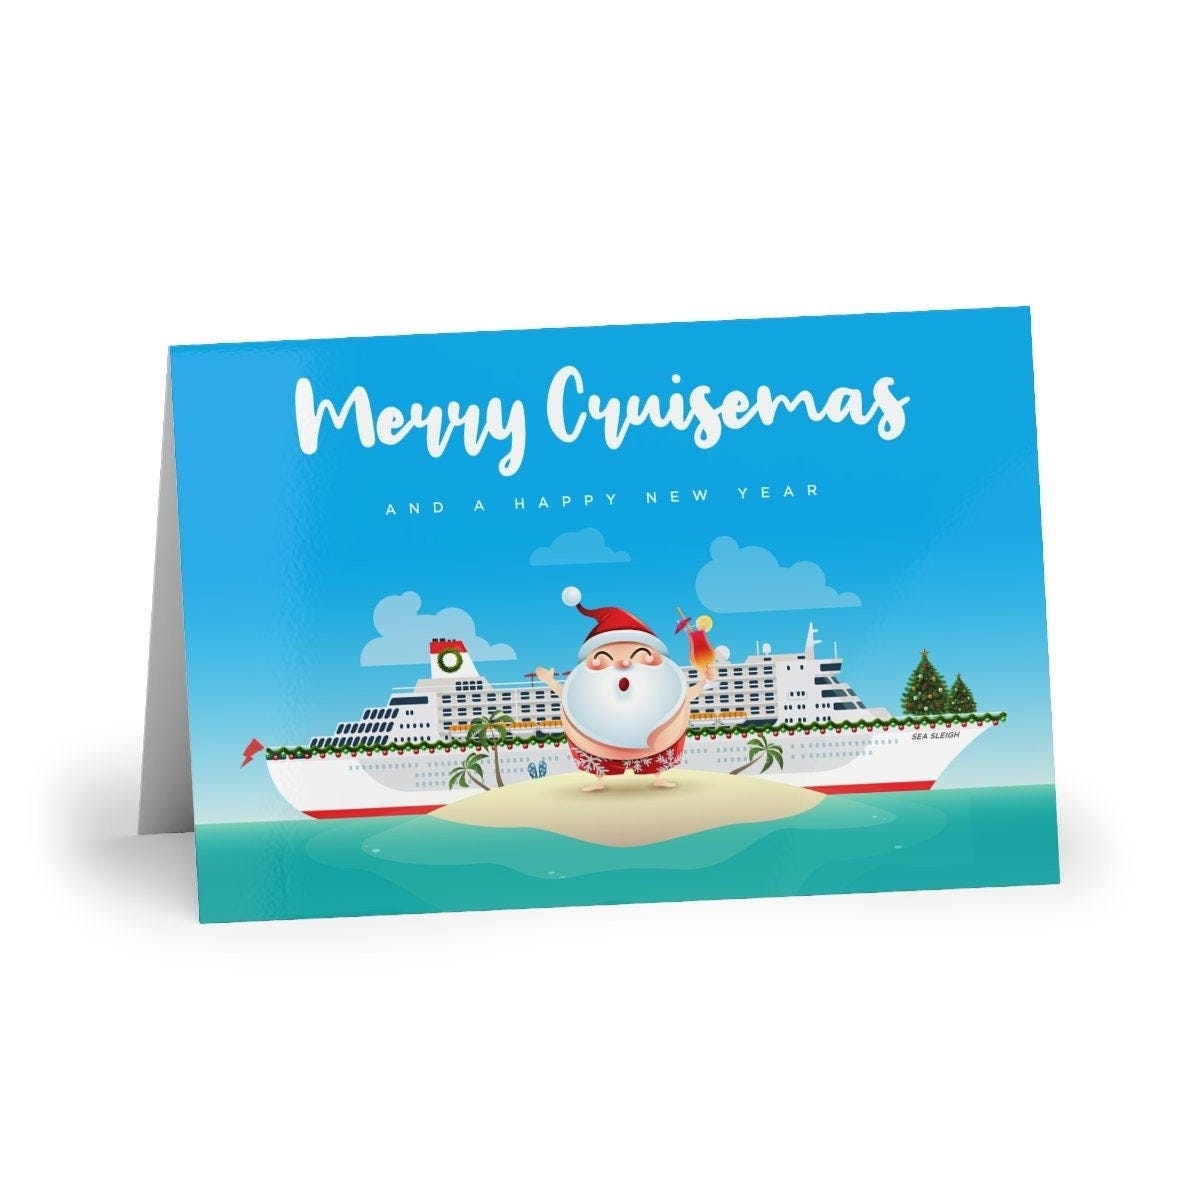 Merry Cruisemas Holiday Cards - Pack of 10 - Blank Cruise Christmas